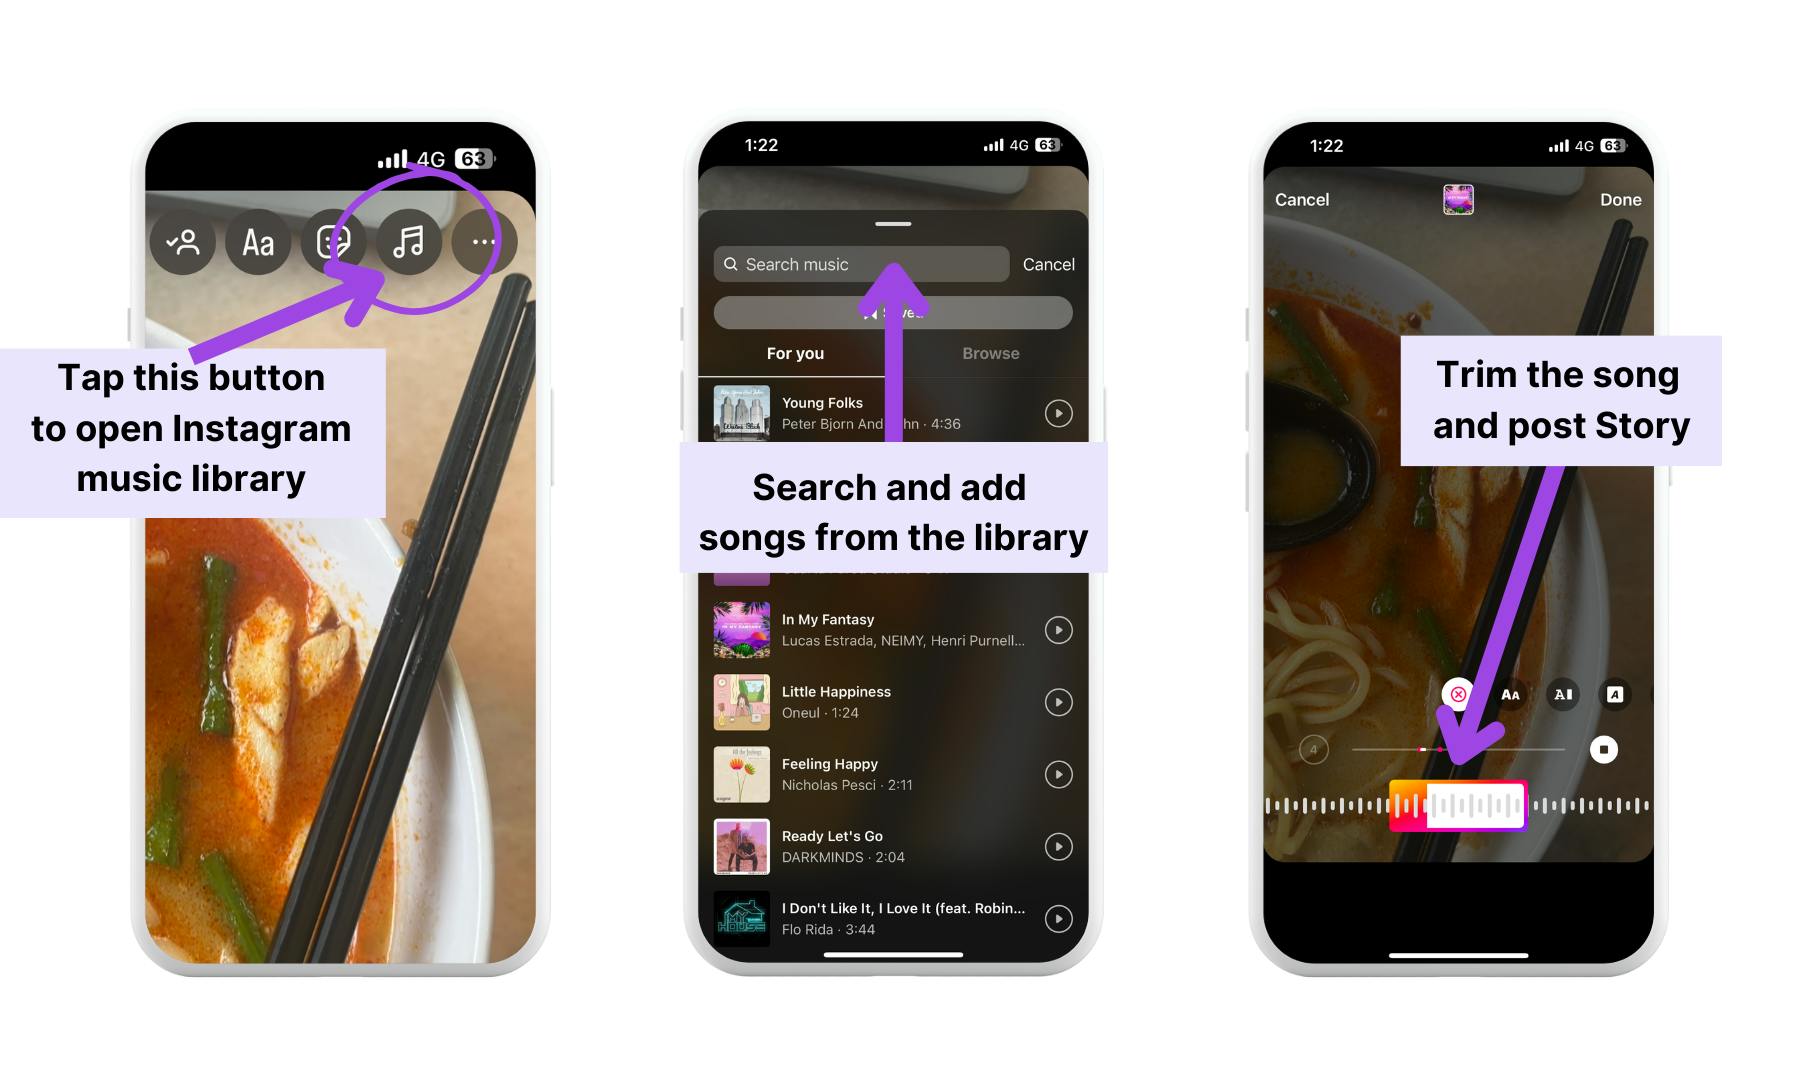 Instructions for adding music to an Instagram Story using Instagram music library